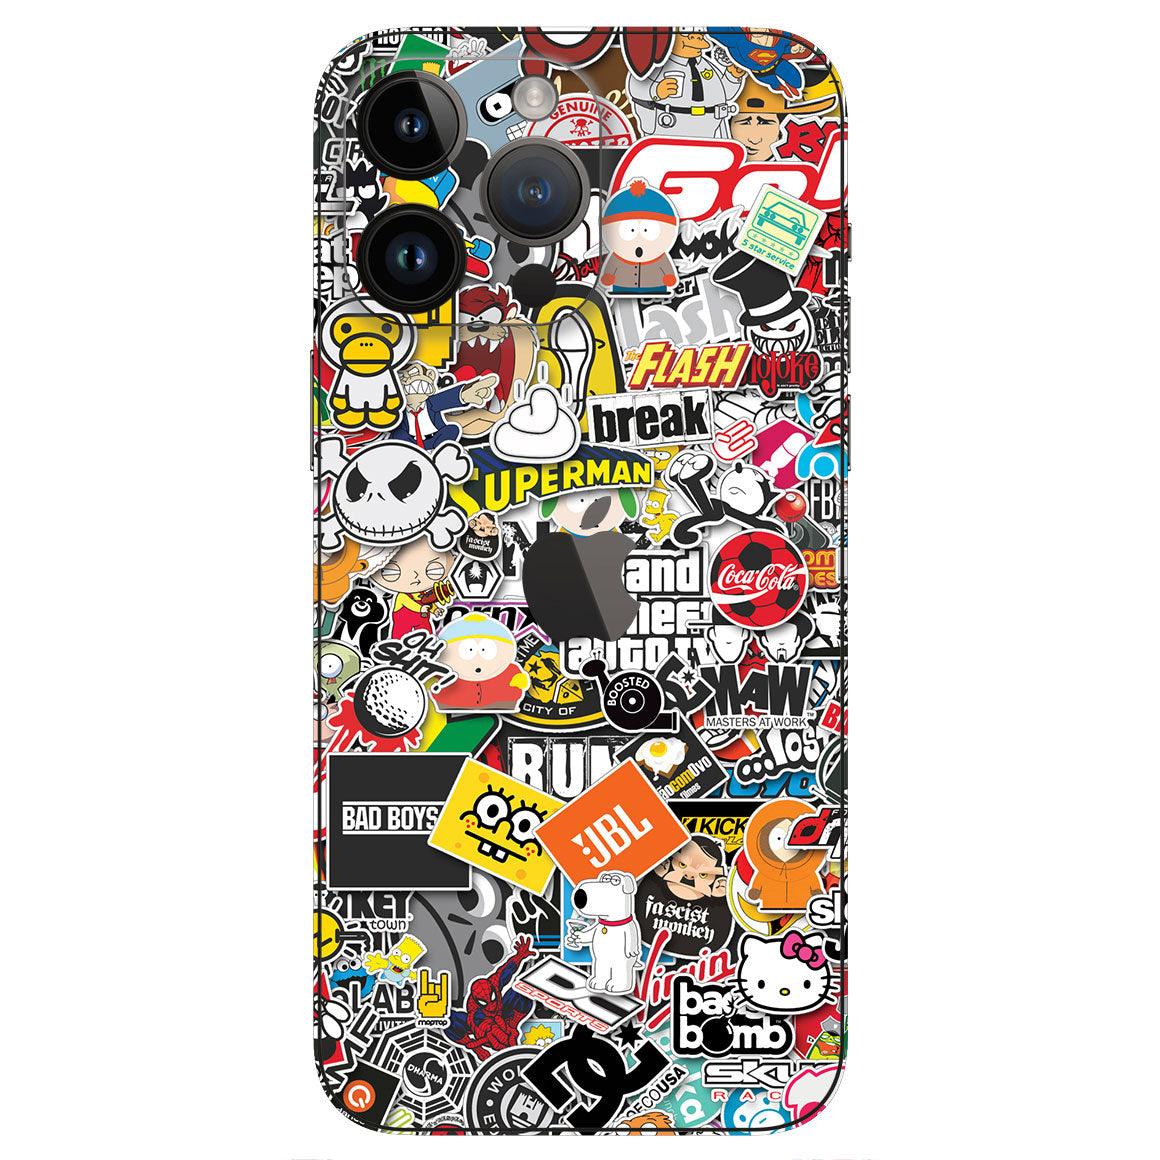 Shop iPhone 14 Pro Max Skins & Decal Wraps